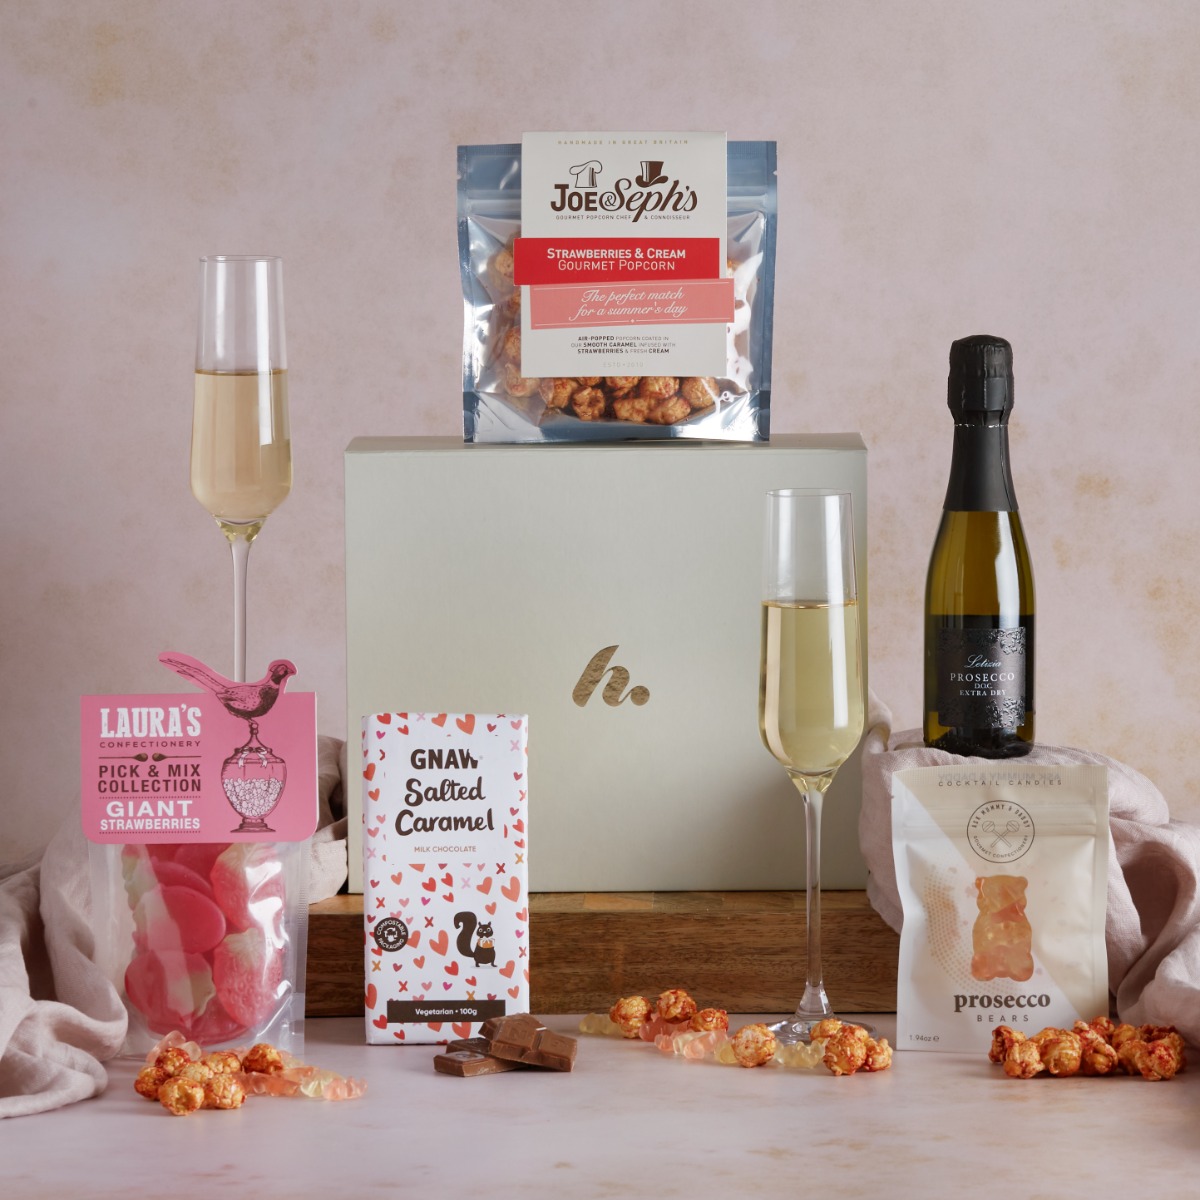 Valentine's Prosecco & Sweets Gift Box Champagne & Prosecco Gifts Hampers.com